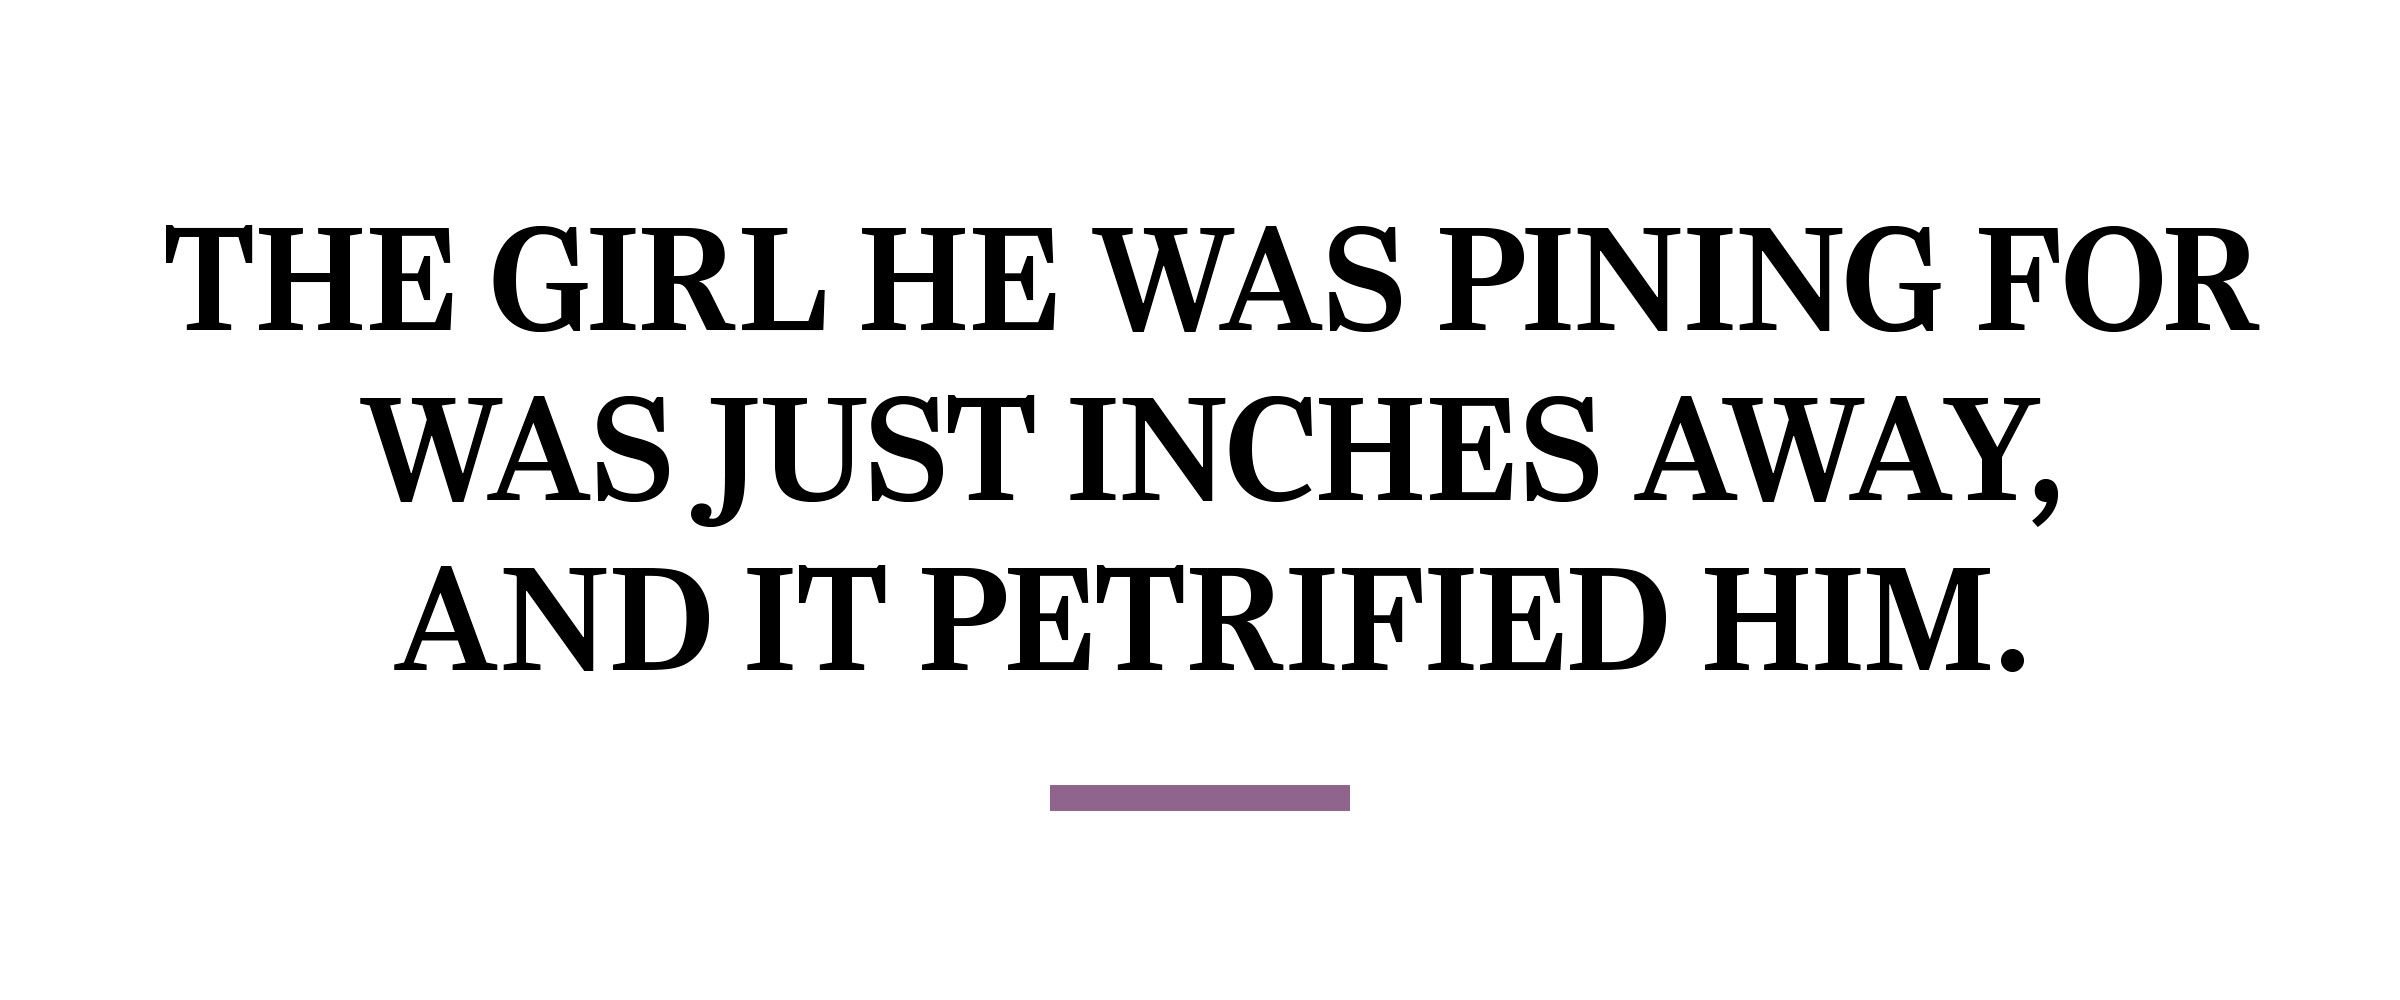 text: The girl he was pining for was just inches away, and it petrified him.